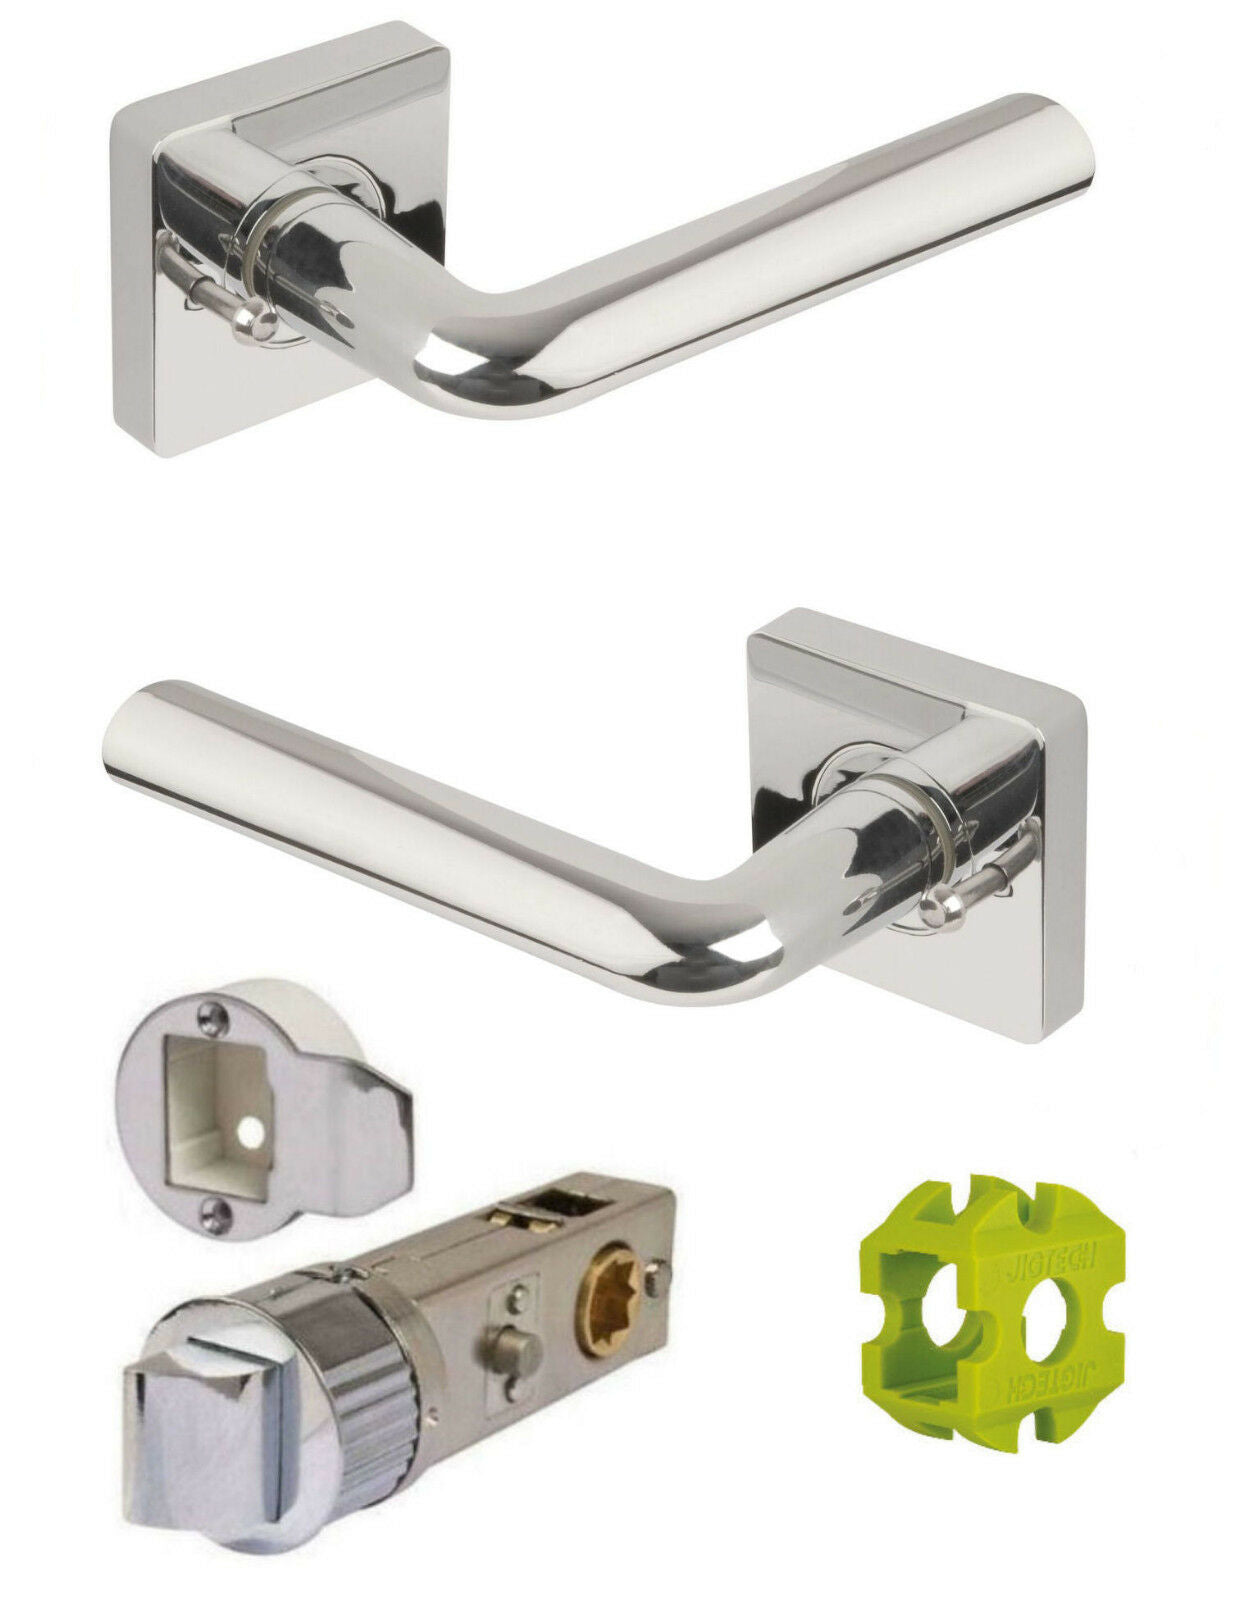 JIGTECH Quick Fit System RIVA Lever on Square Rose Door Handles Chrome/SC WC Set